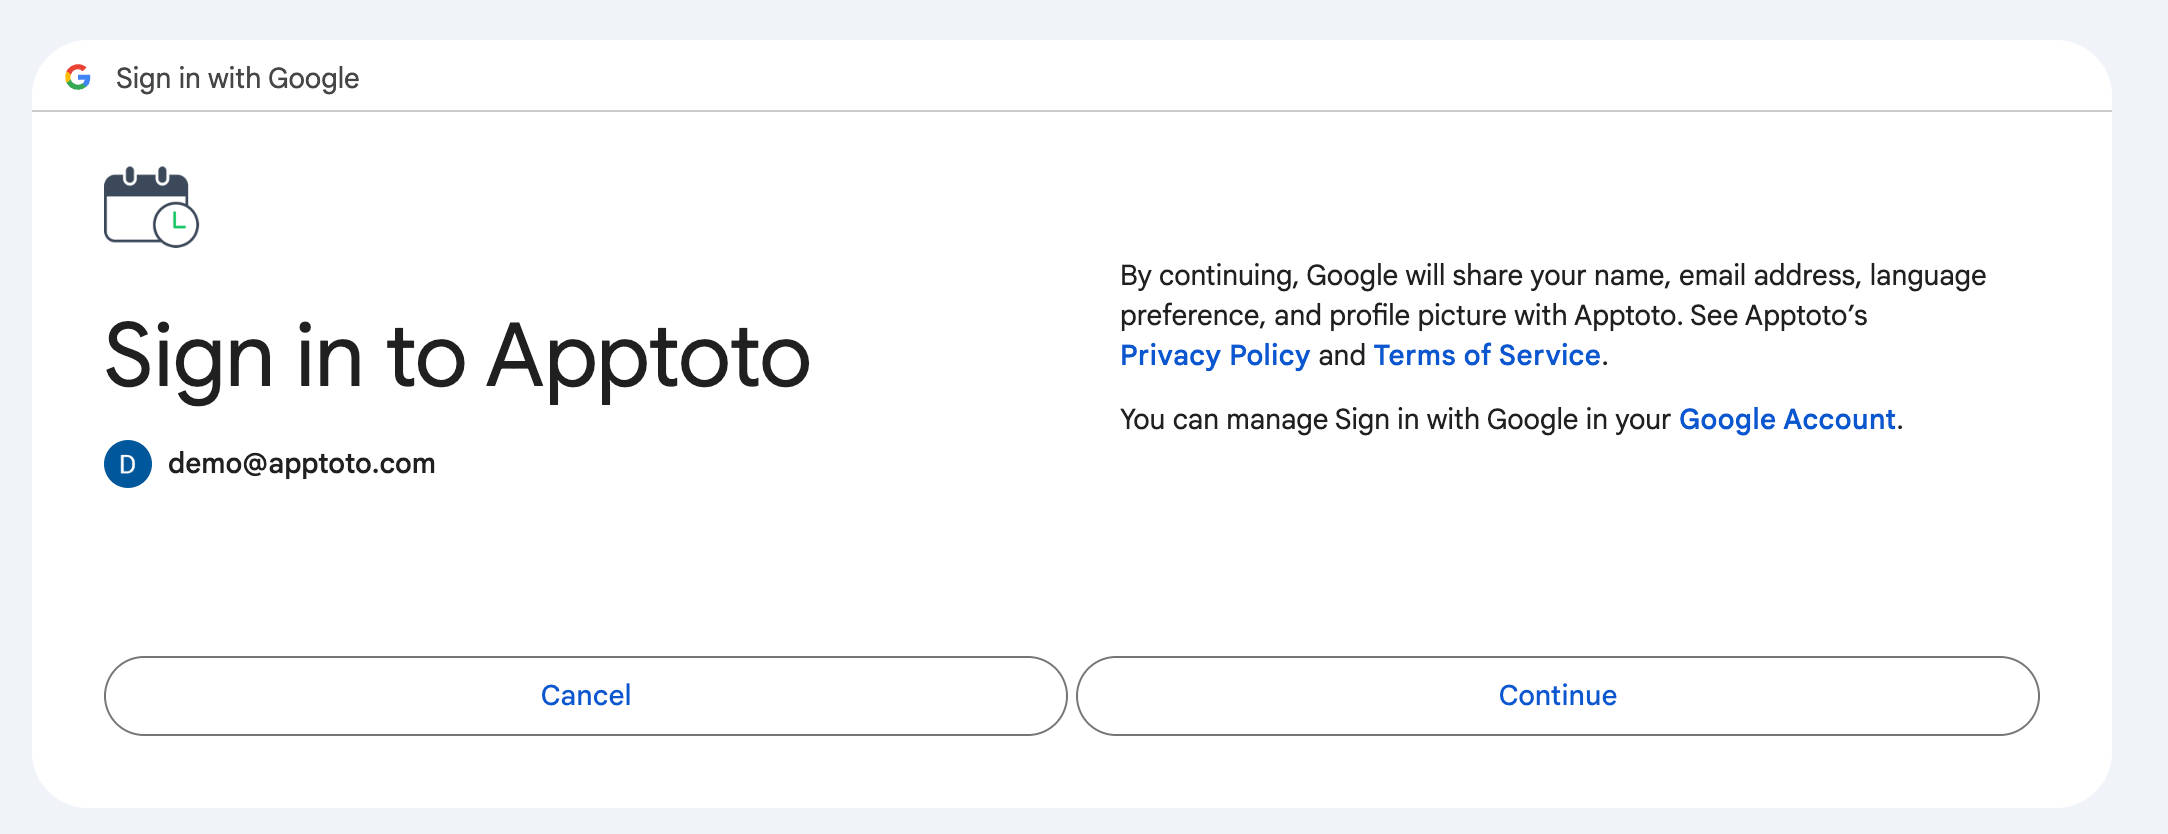 Grant Google the permission to share your information with Apptoto